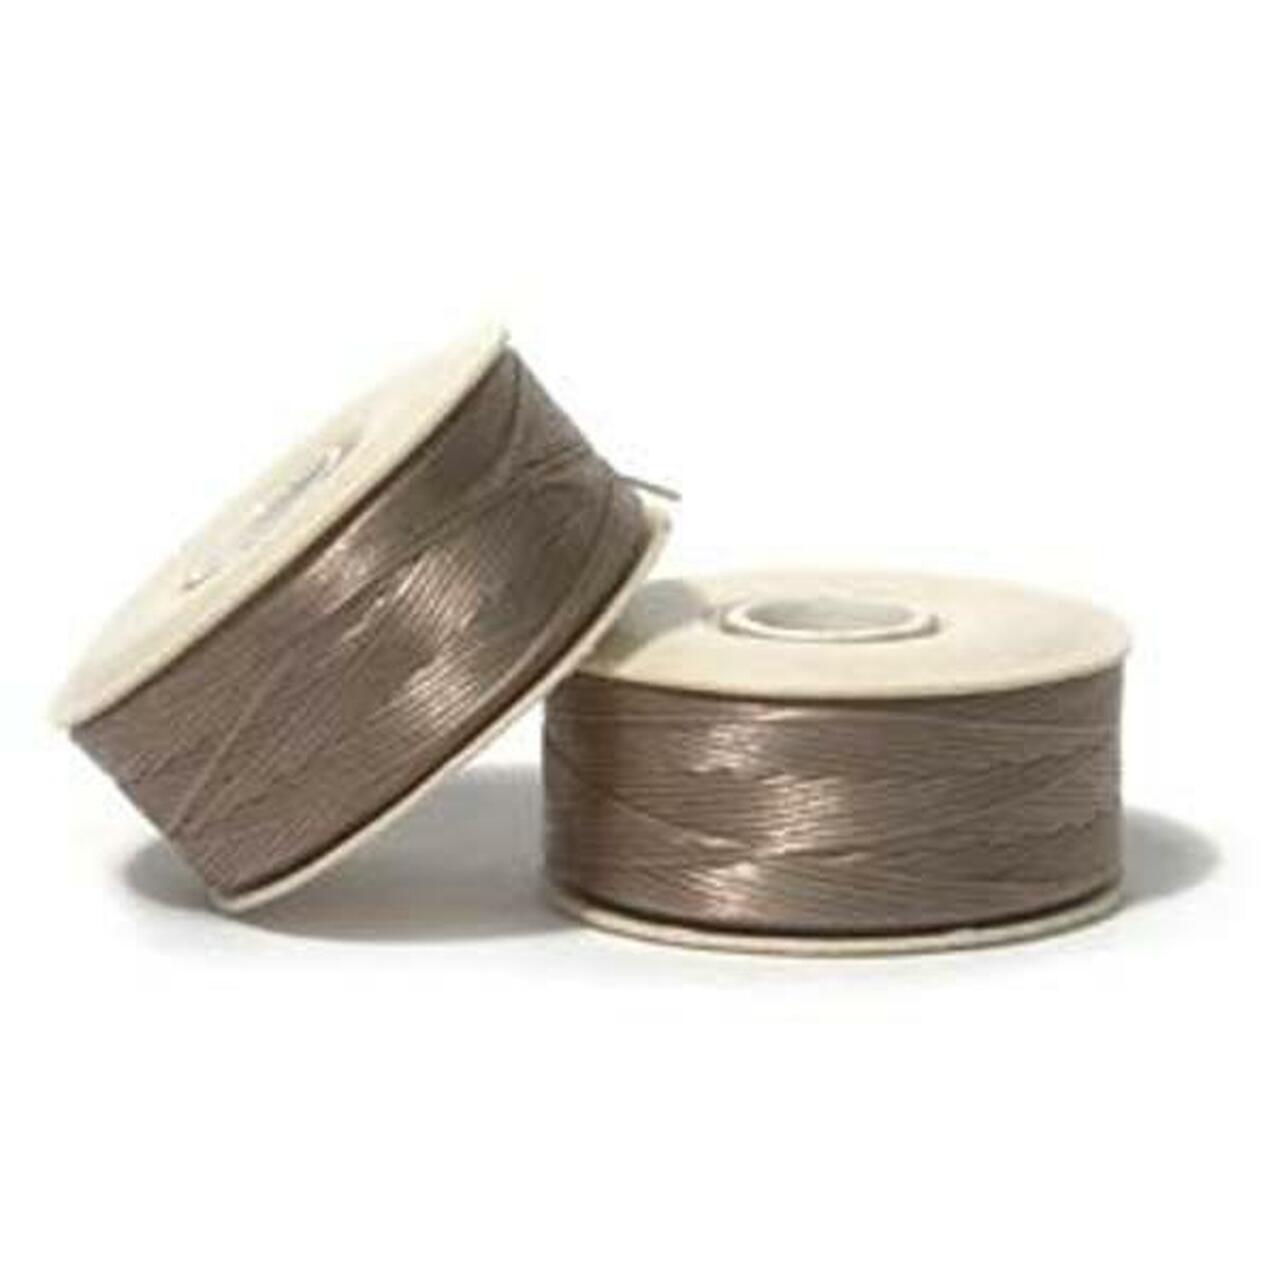 Sand Ash Nymo -  size D -  58 meter per bobbin - 1 per pack only 1 in stock